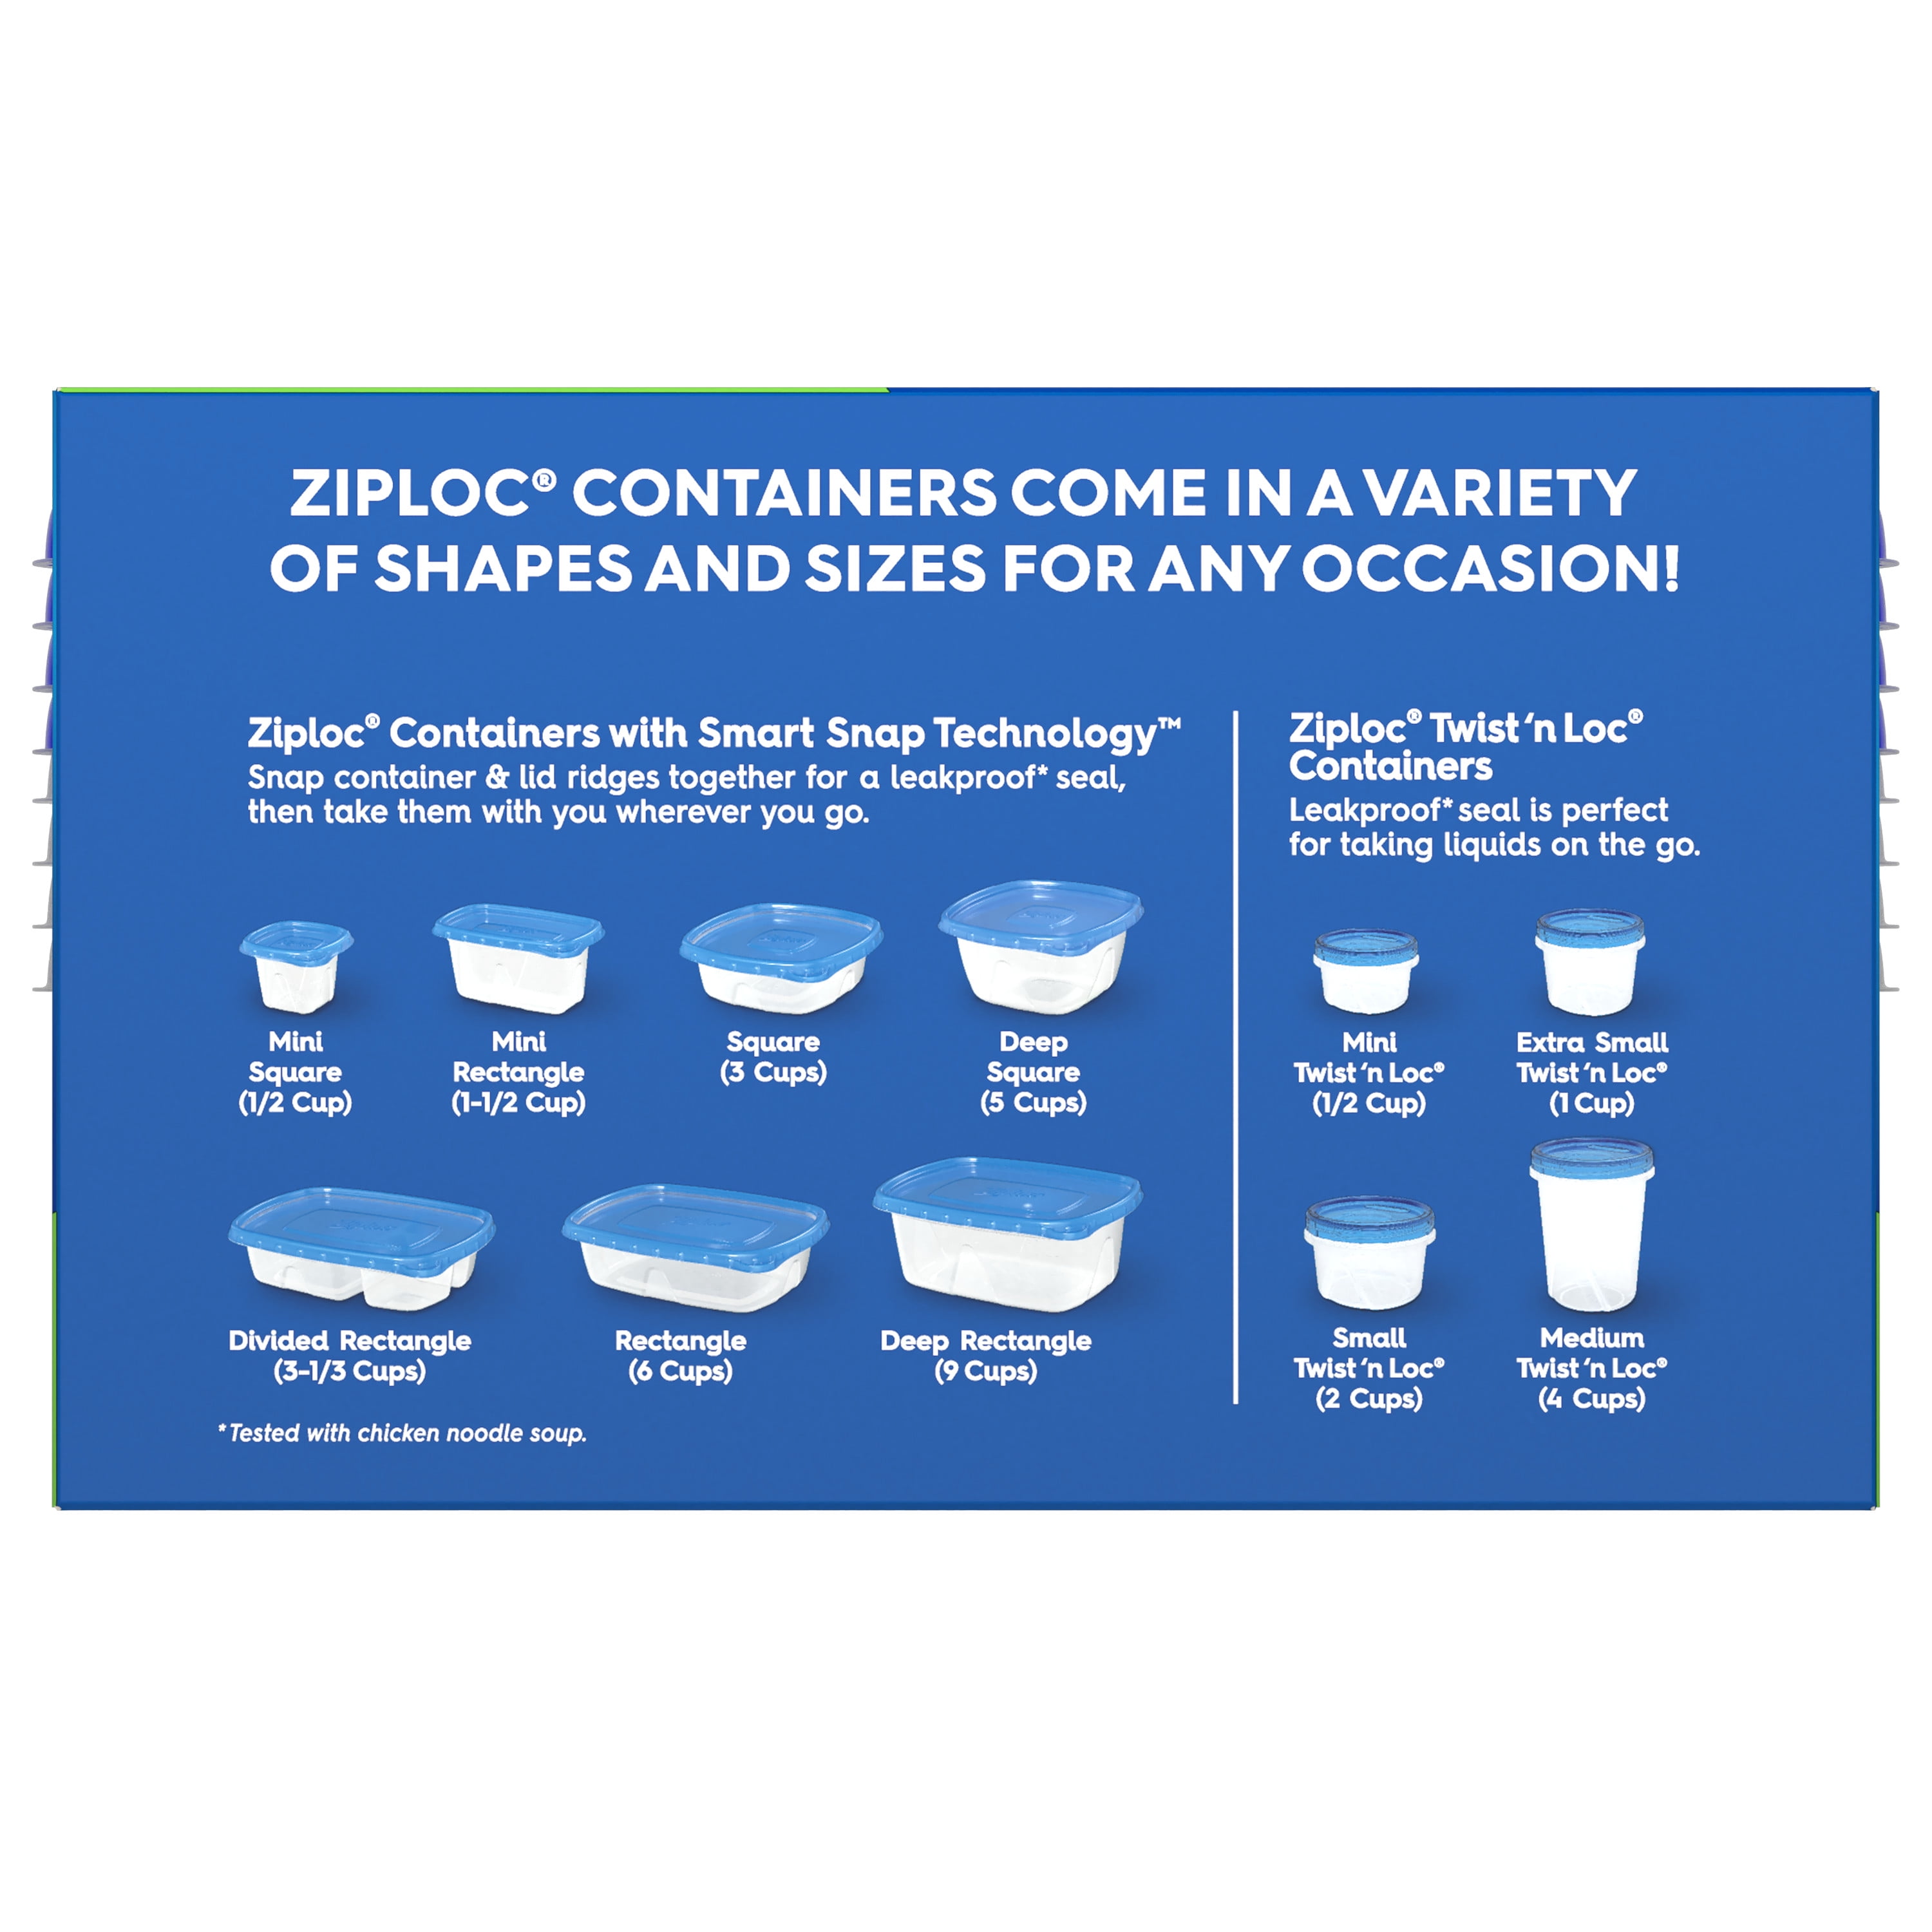 Why aren't Ziploc containers made in square shape anymore